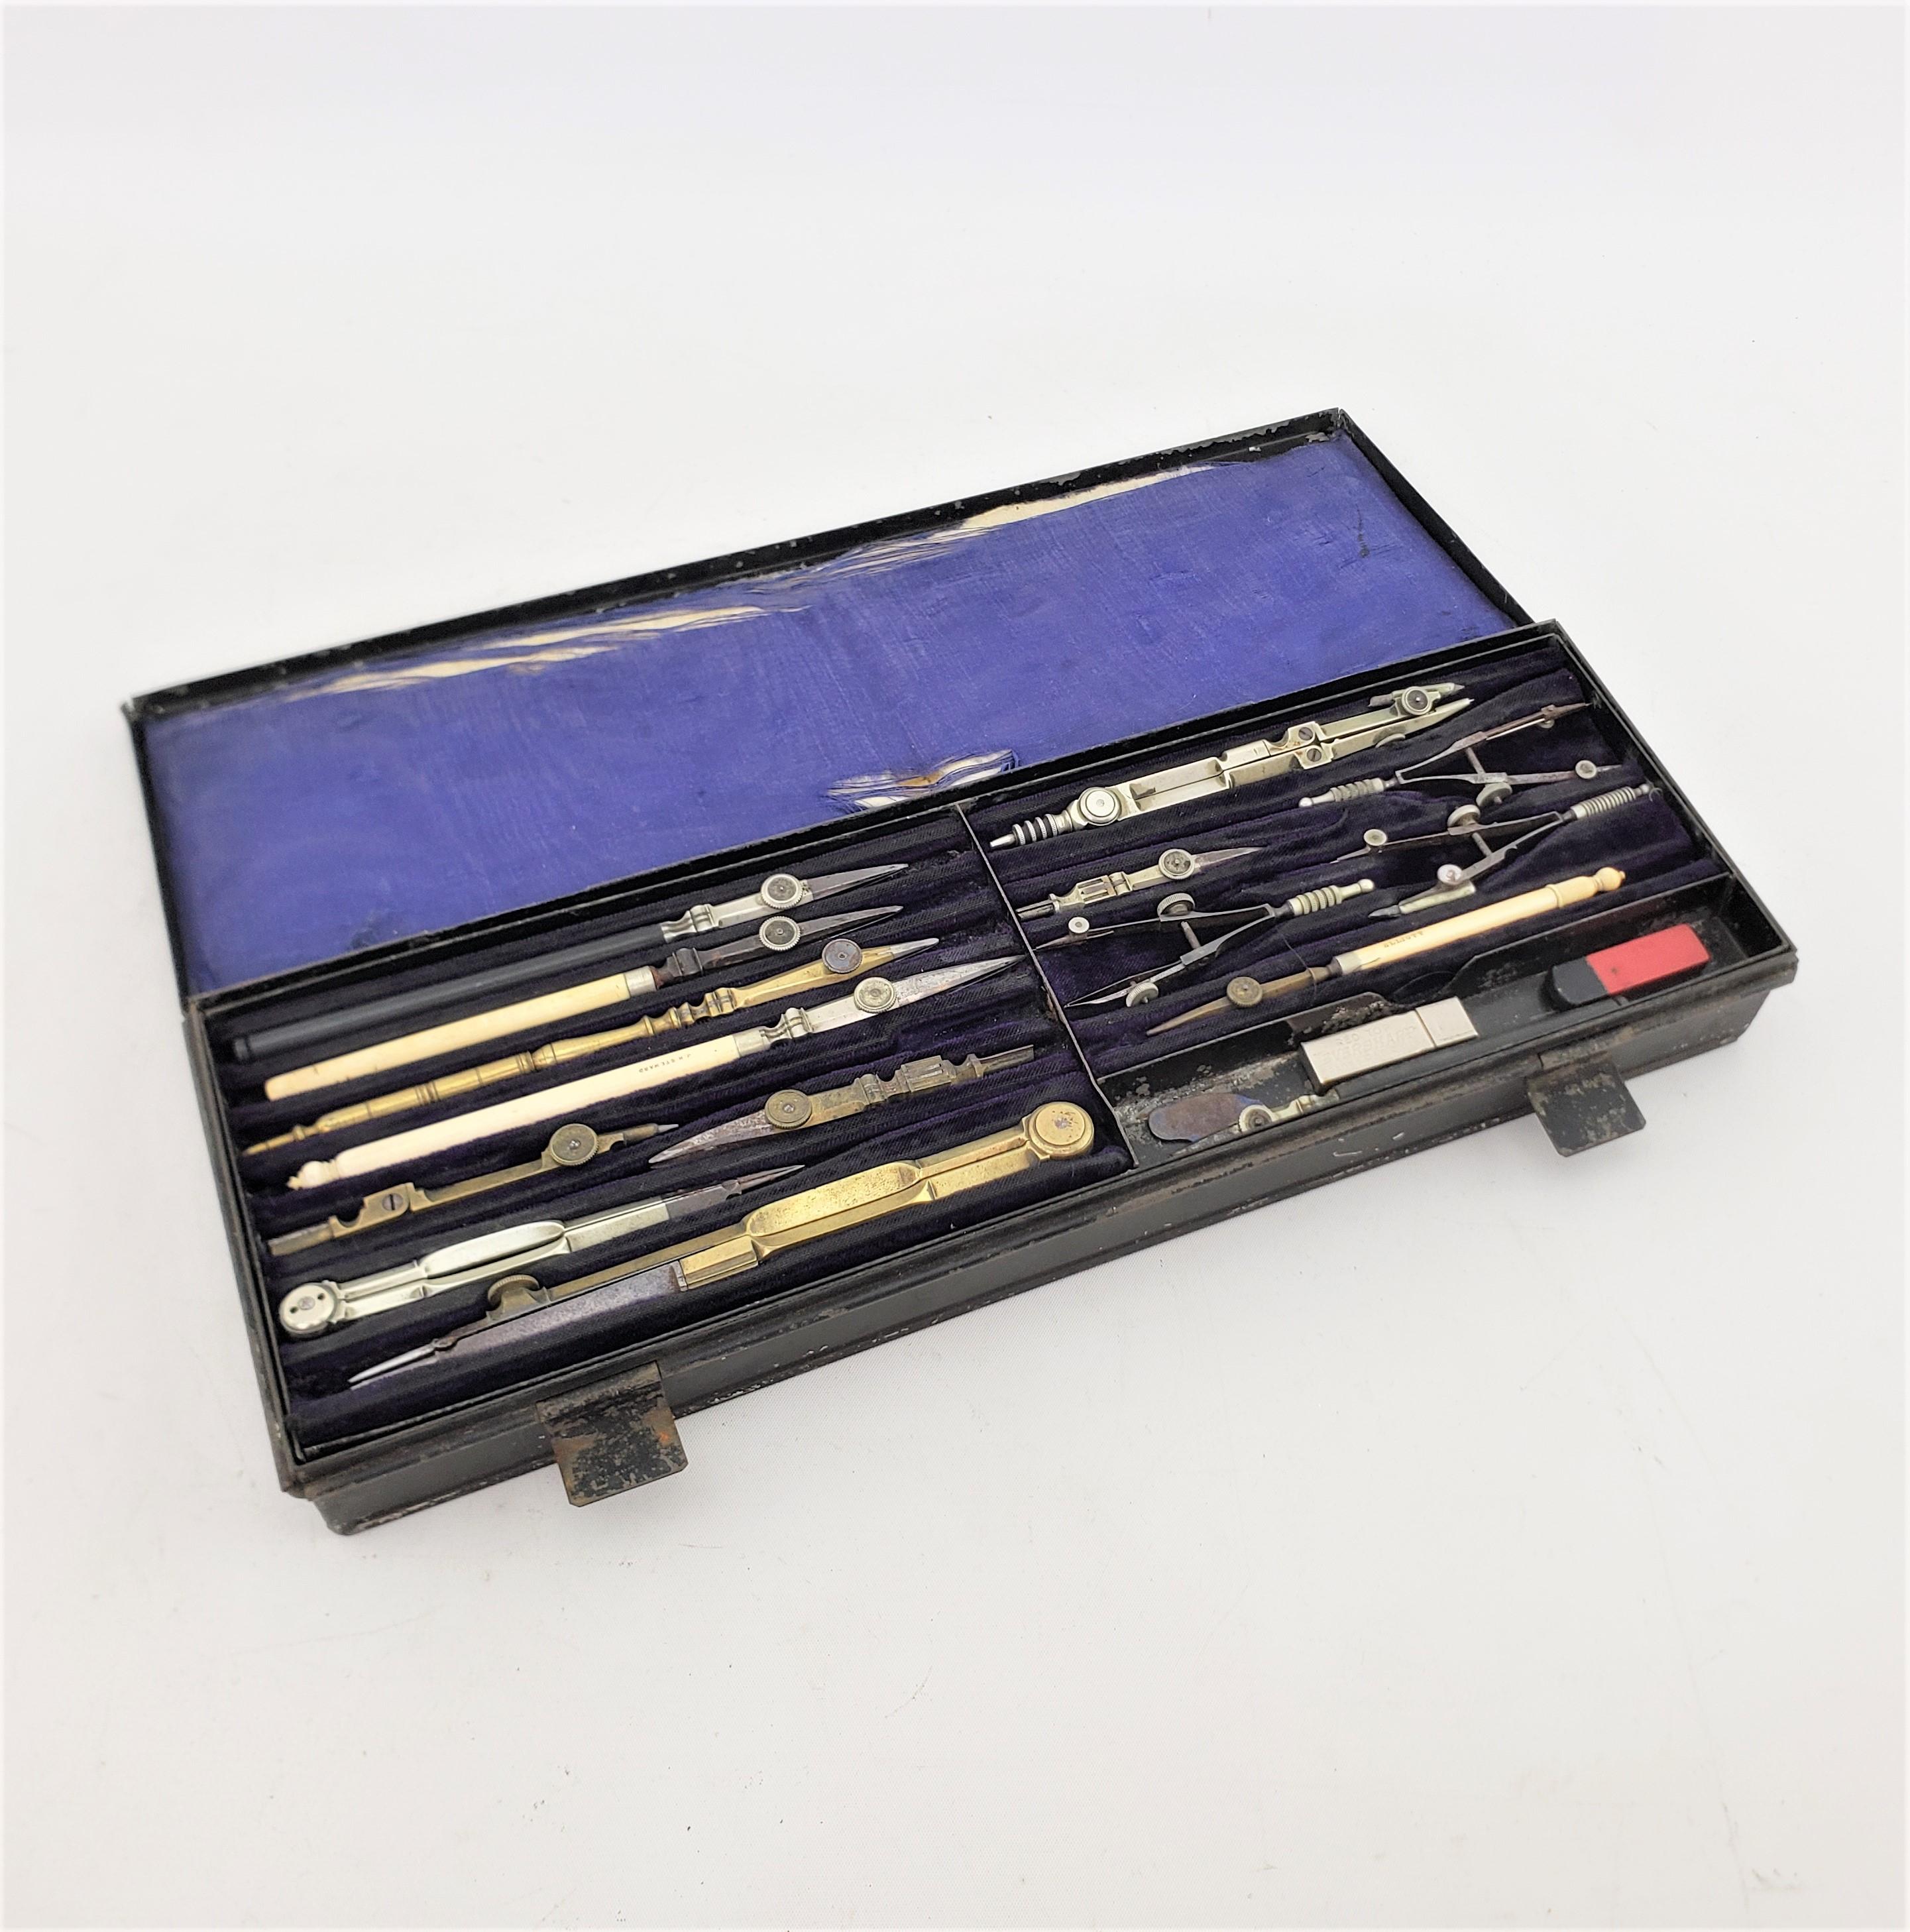 Large 24 Piece Antique Mechanical Drafting Set & Original Fitted Metal Case In Good Condition For Sale In Hamilton, Ontario